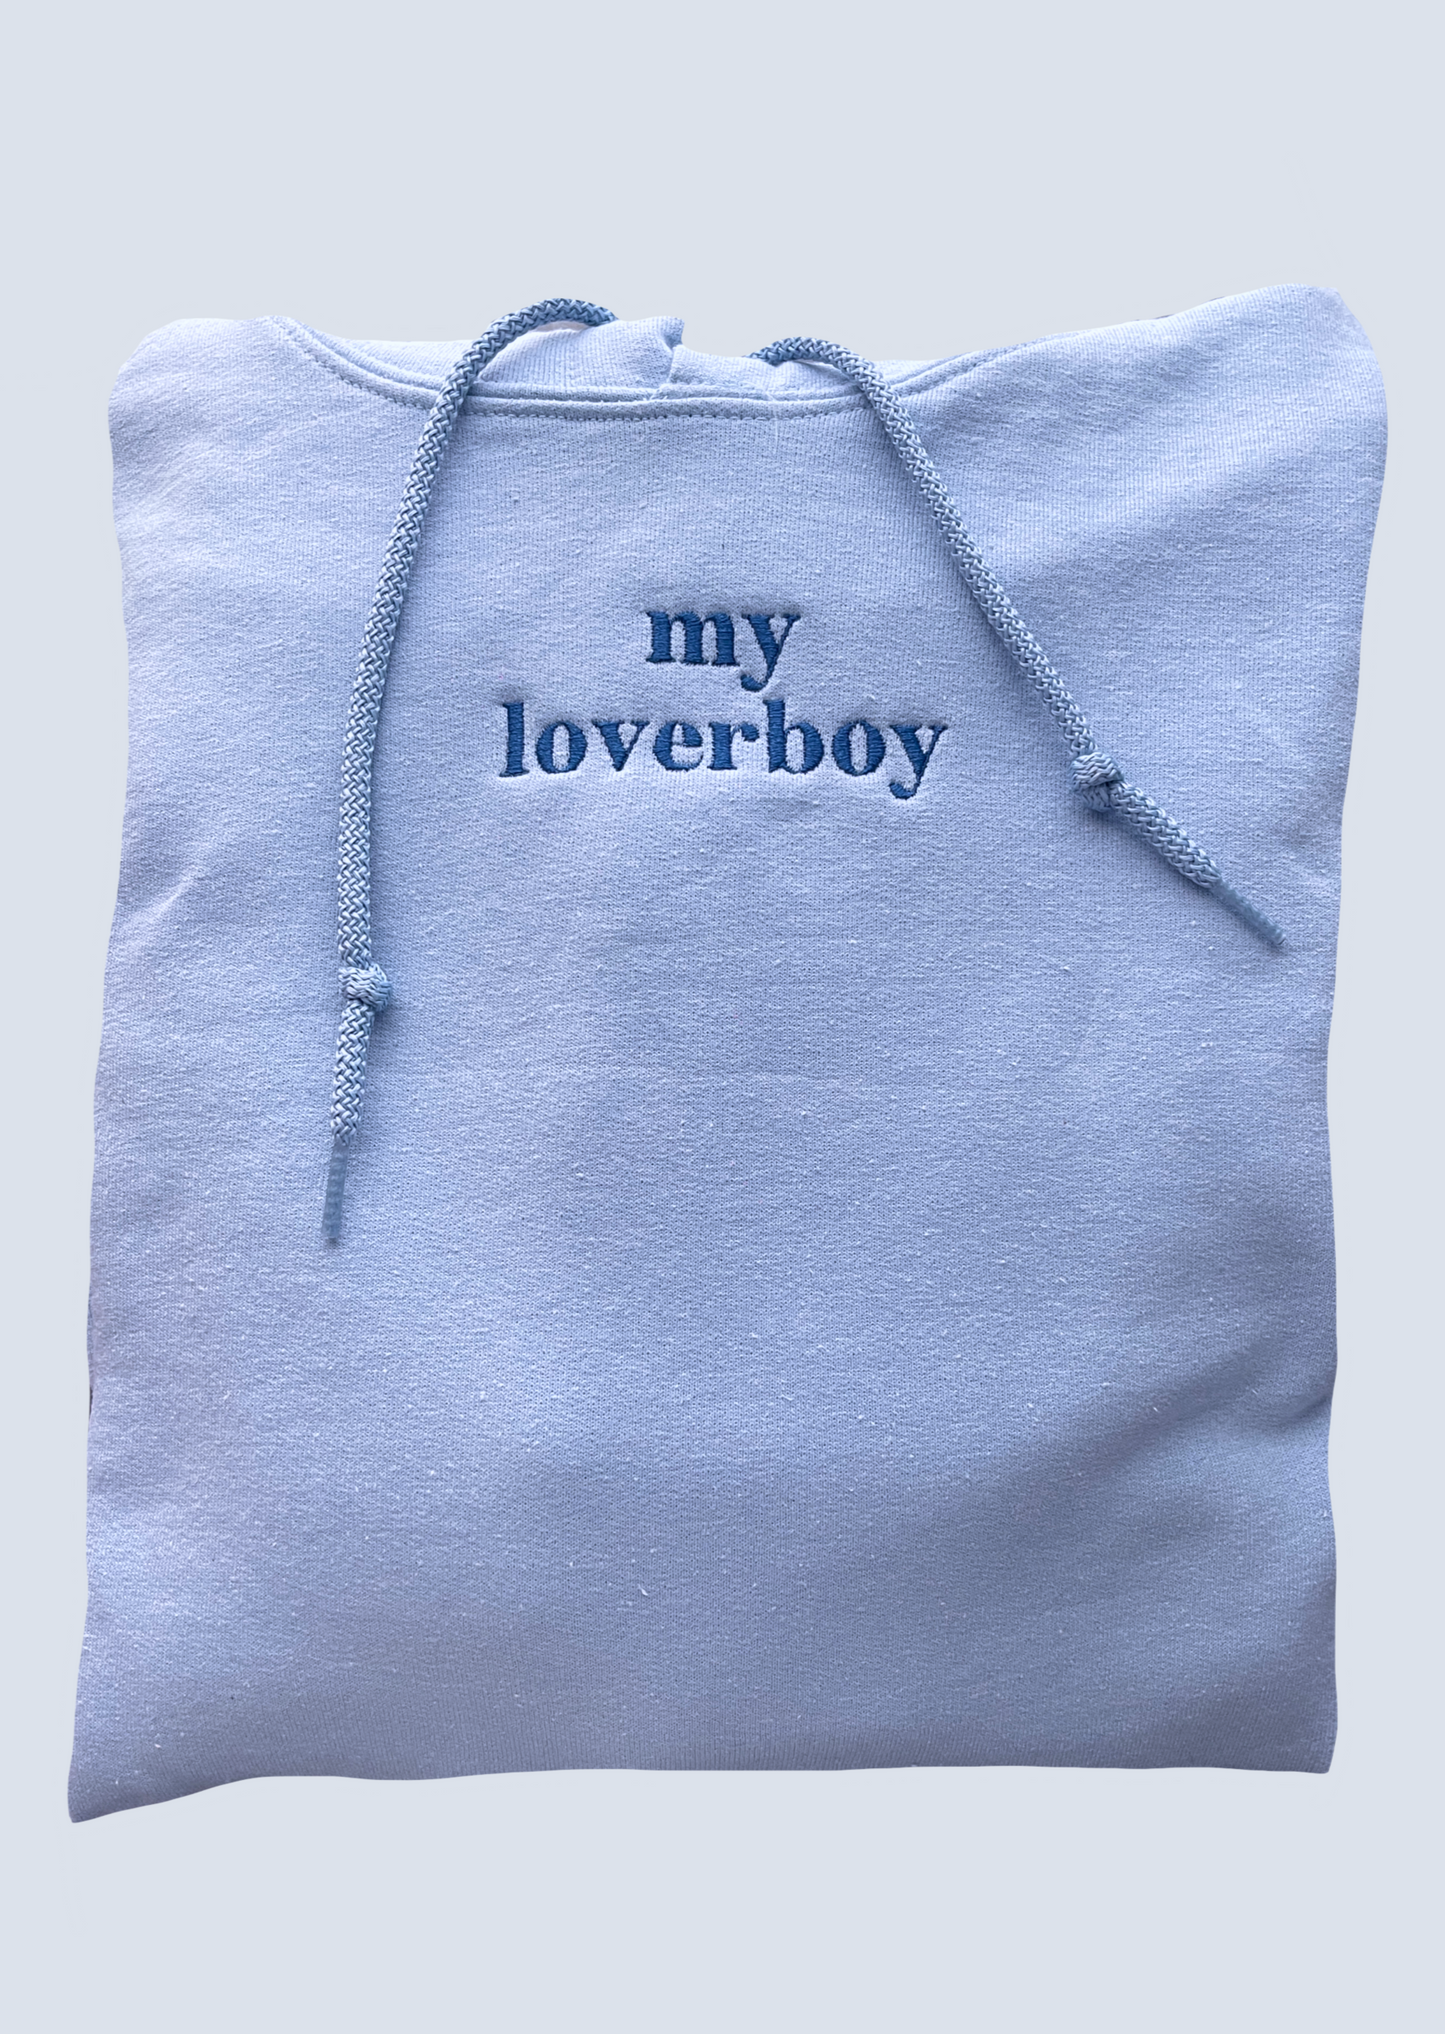 "My Loverboy" Embroidery